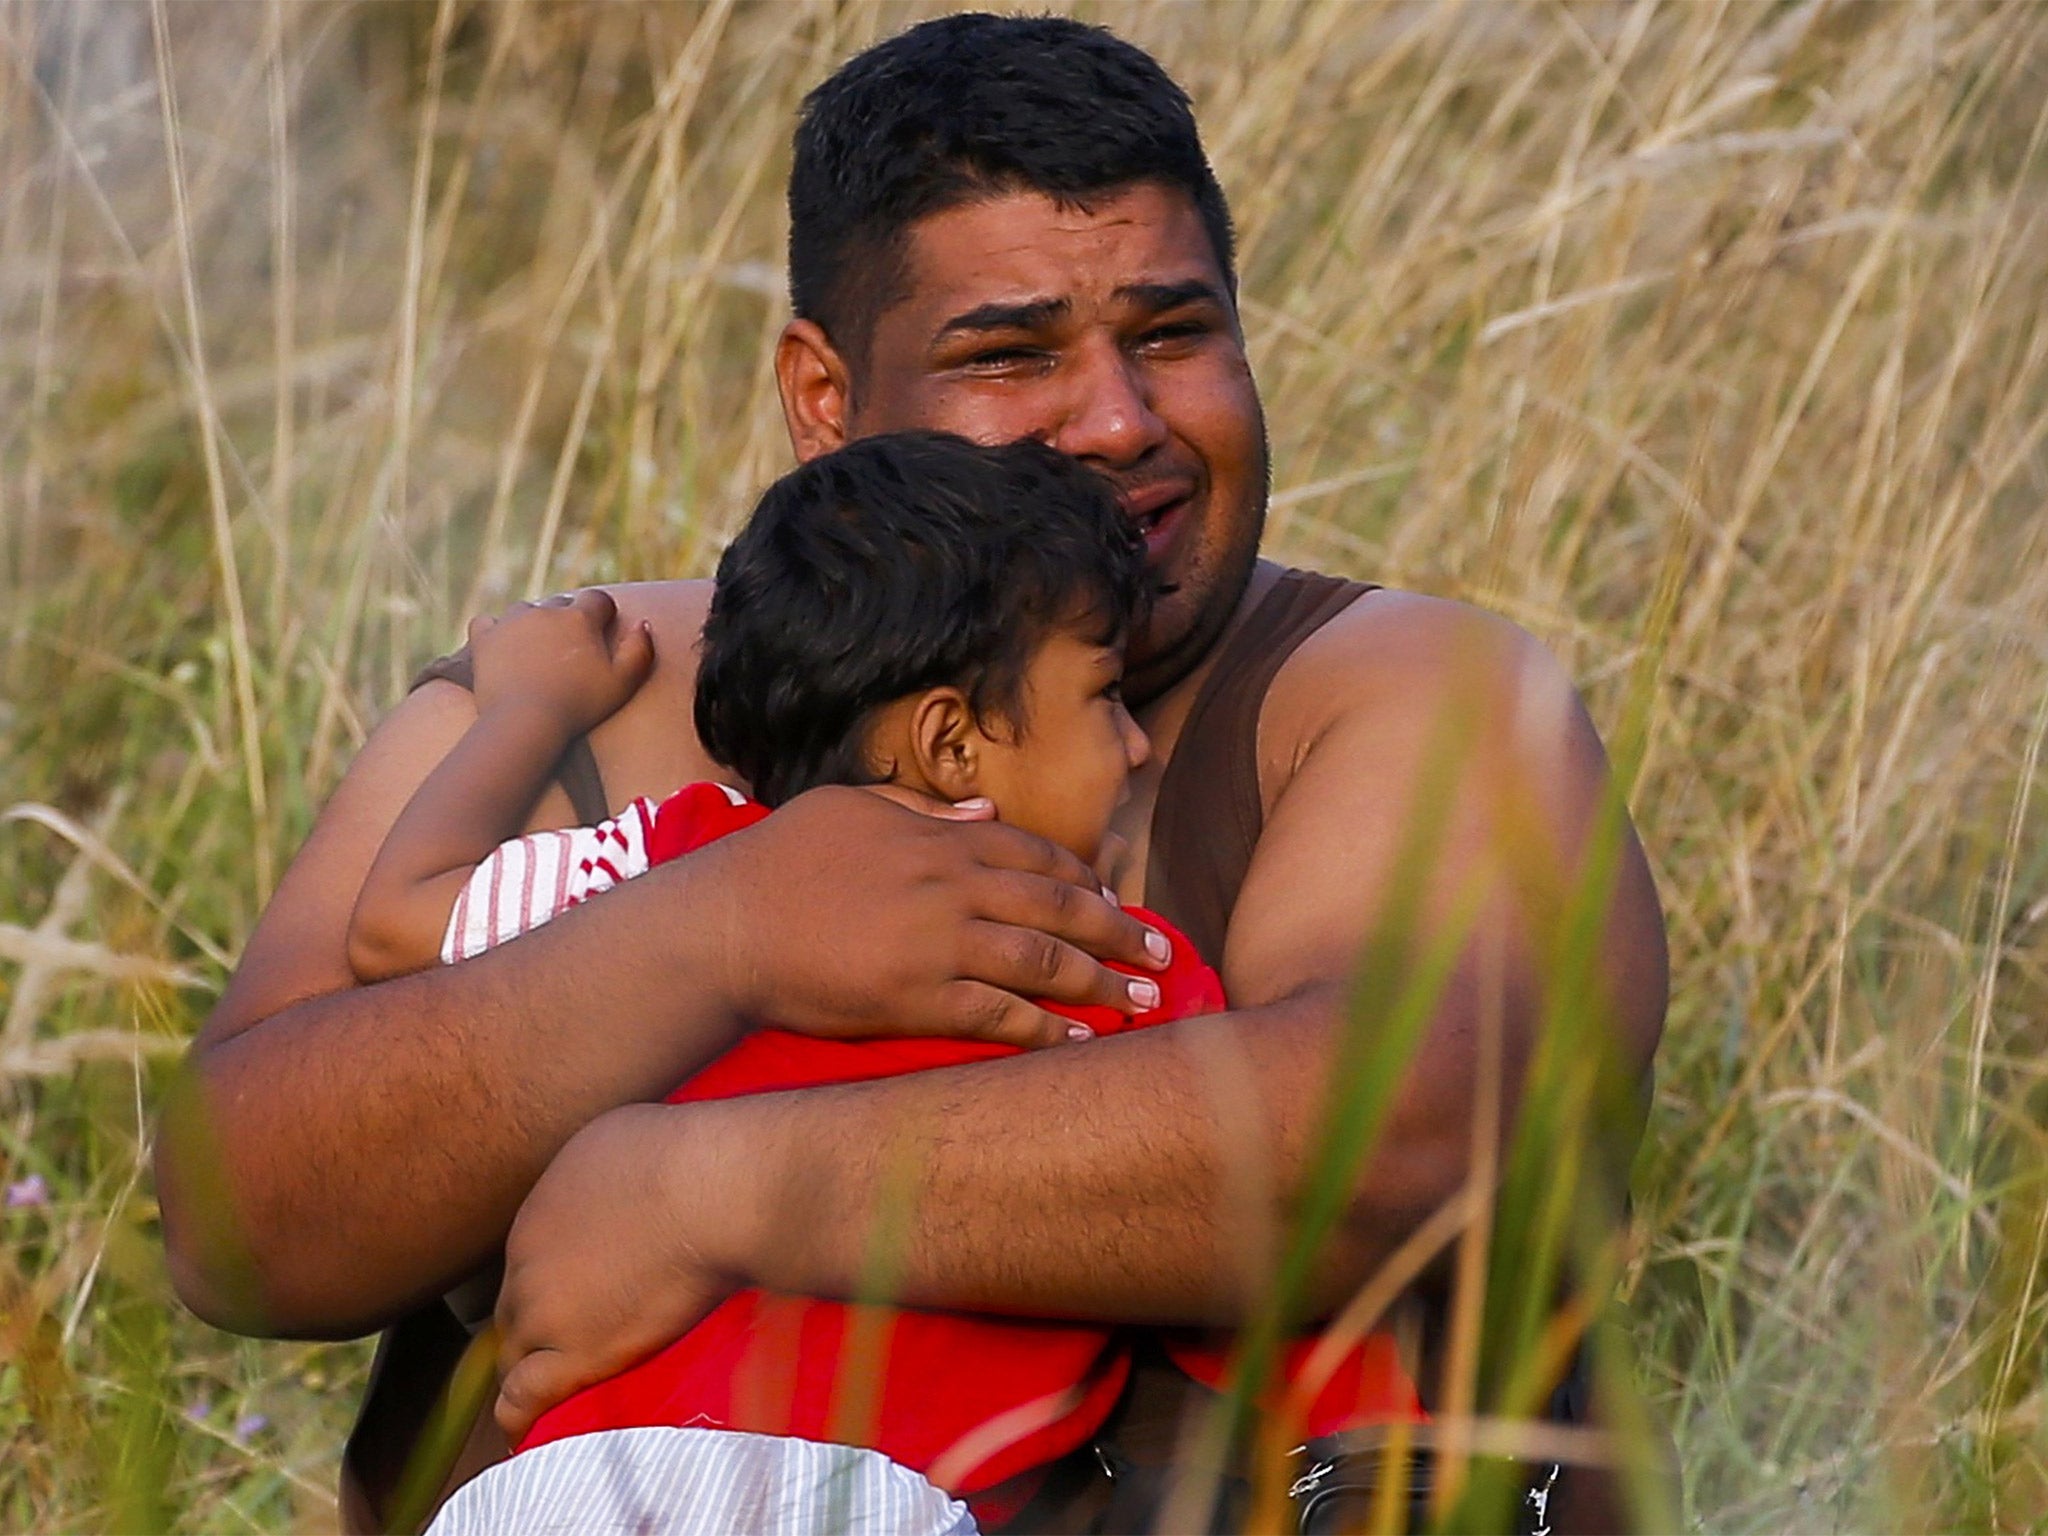 A refugee cries as he holds a child on the Serbian side of the border with Hungary in Asotthalom